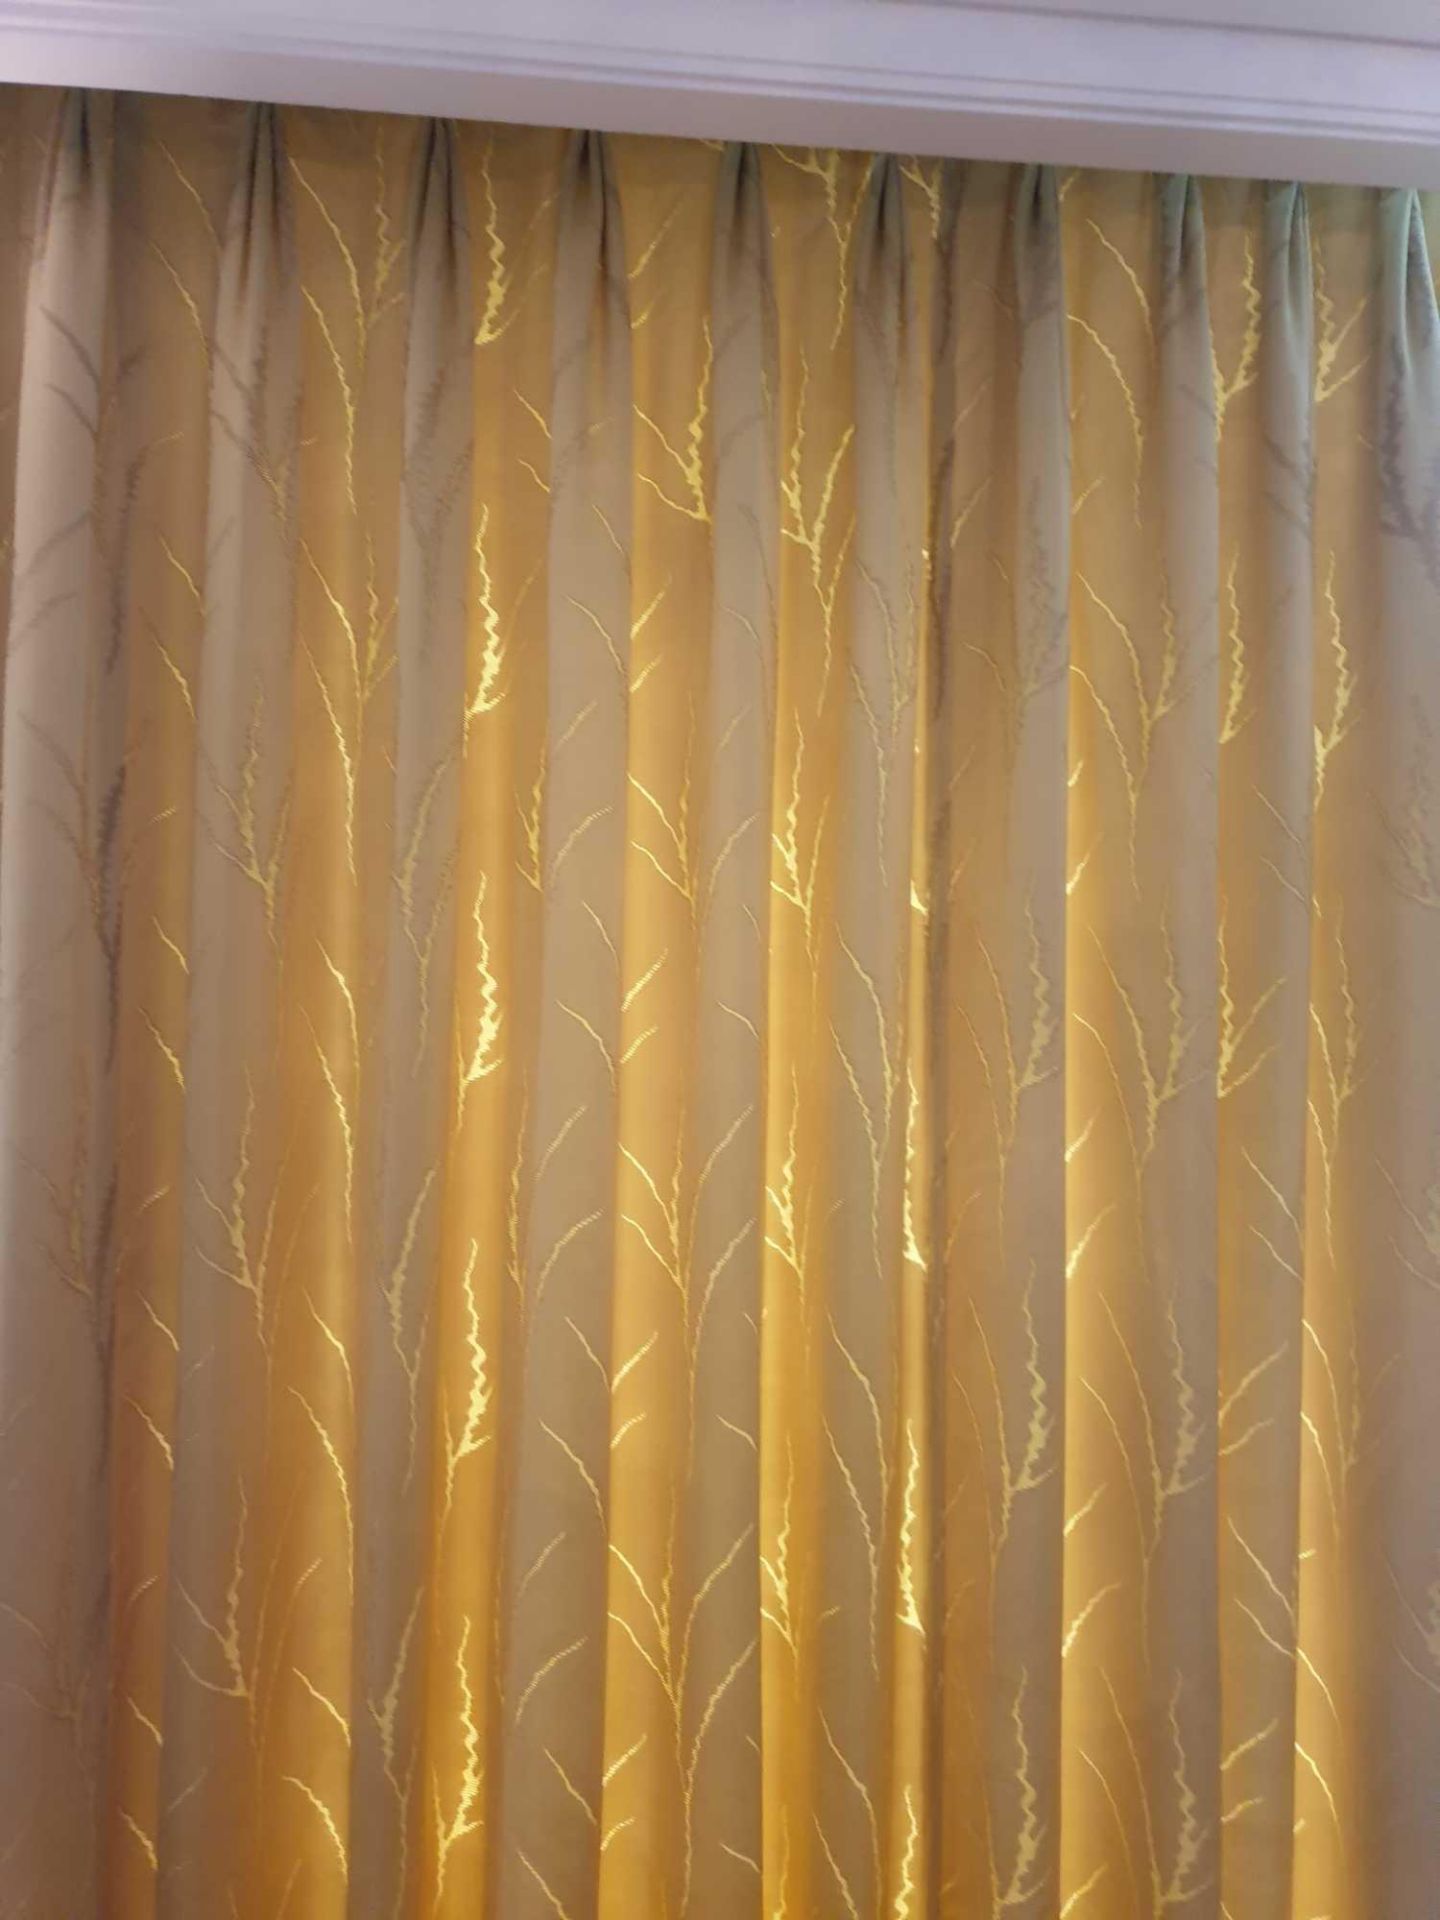 A Pair Of Silk Green Pattered Drapes 240 x 250cm (The Terrace) - Image 2 of 2